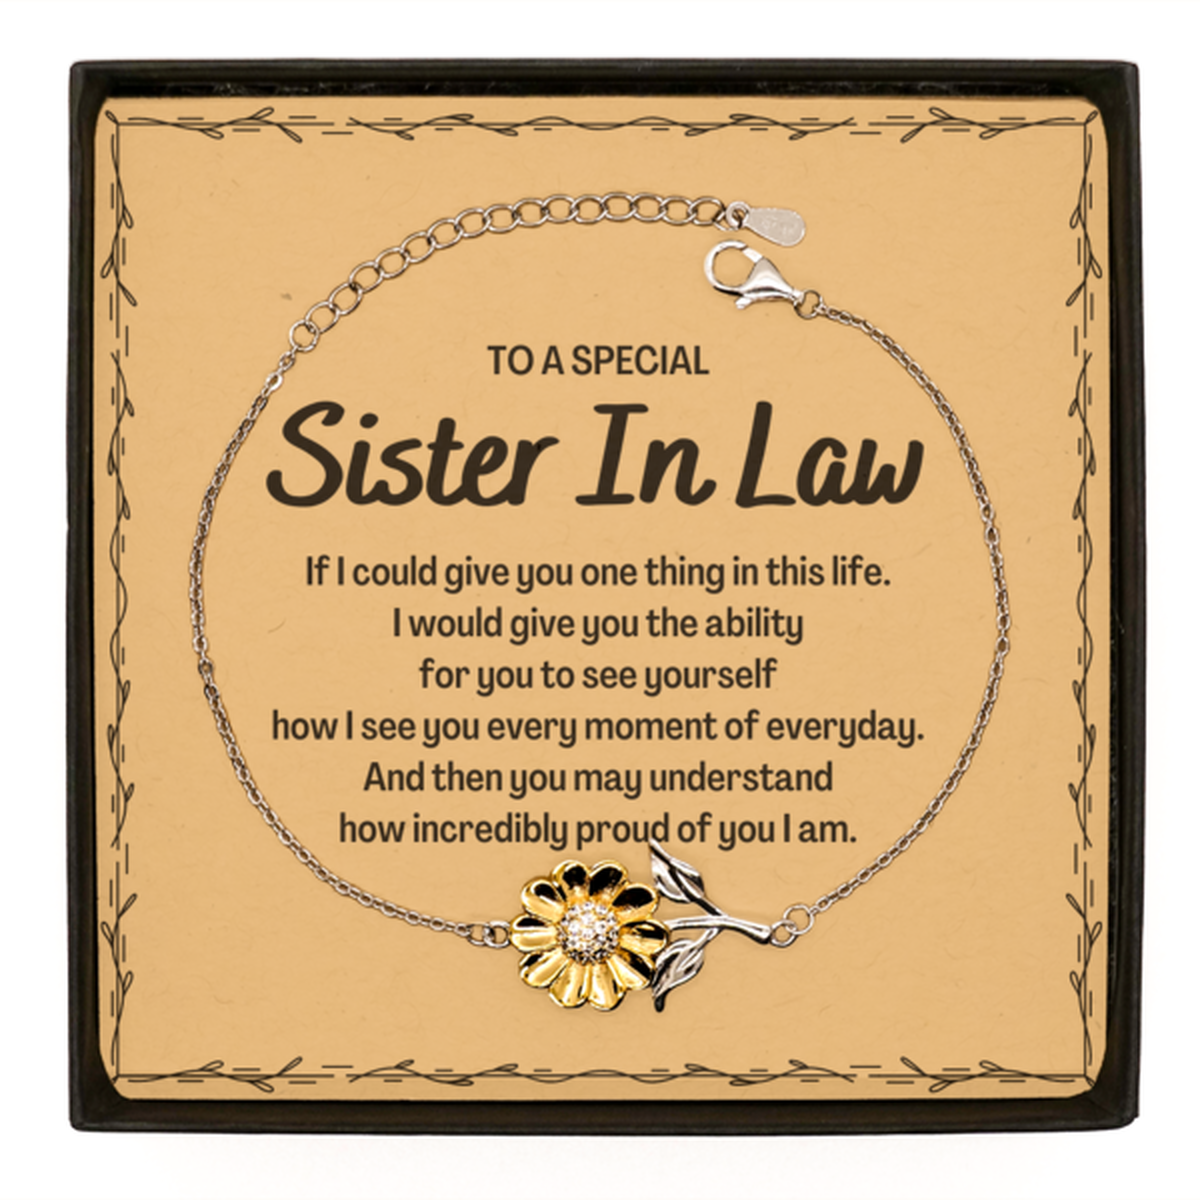 To My Sister In Law Sunflower Bracelet, Gifts For Sister In Law Message Card, Inspirational Gifts for Christmas Birthday, Epic Gifts for Sister In Law To A Special Sister In Law how incredibly proud of you I am